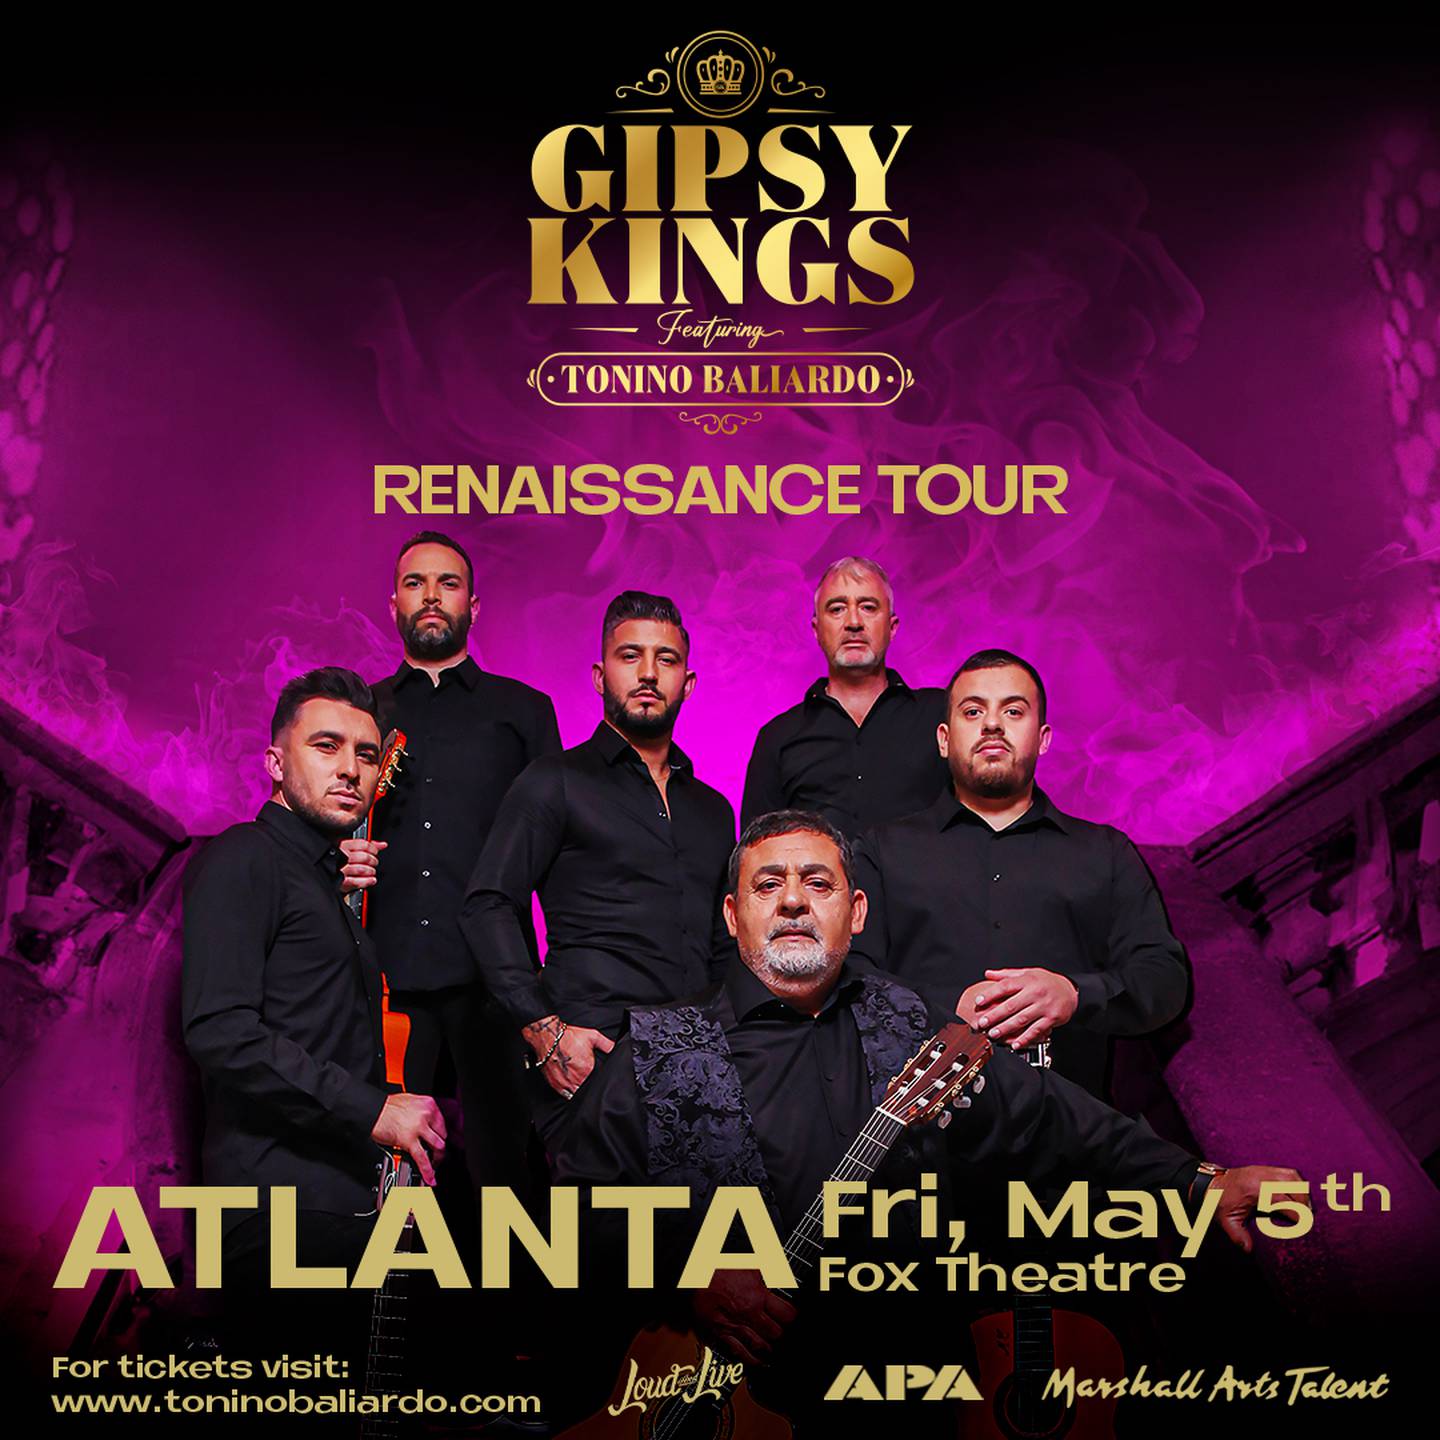 ENTER TO WIN: Gipsy Kings tickets